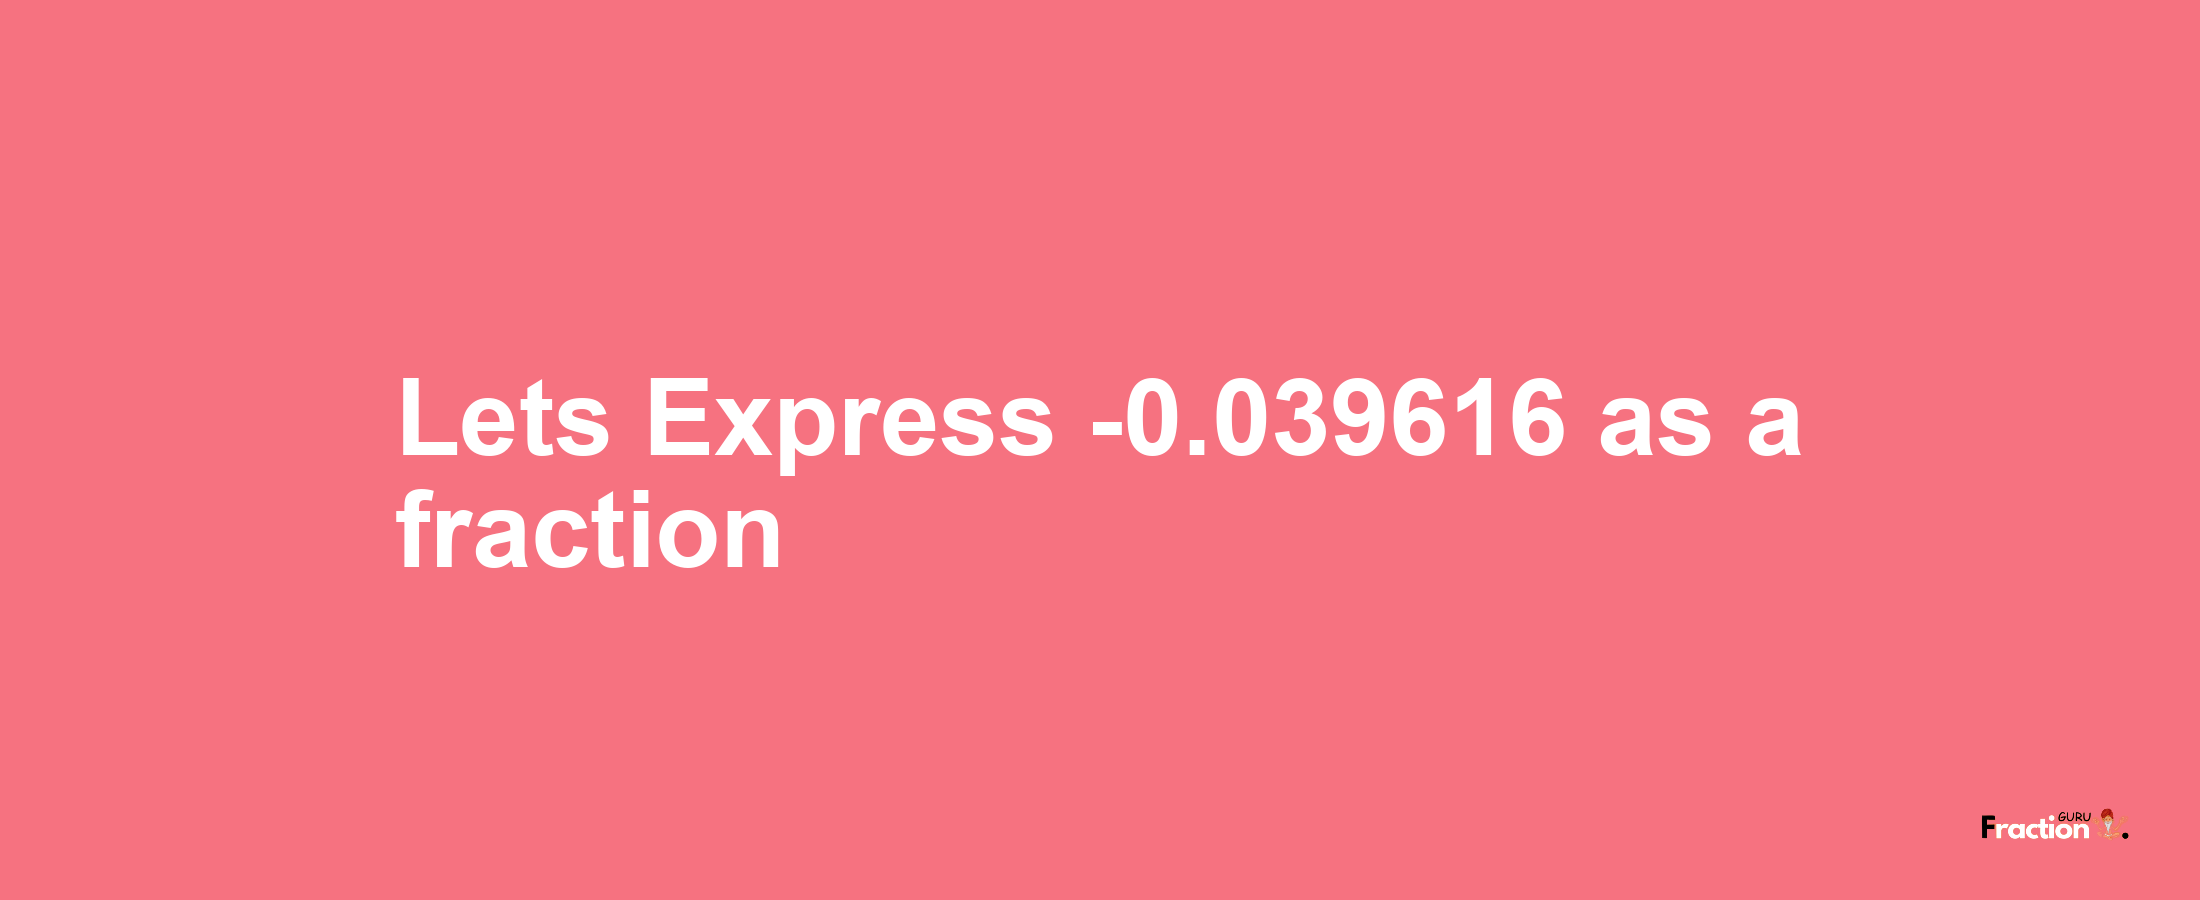 Lets Express -0.039616 as afraction